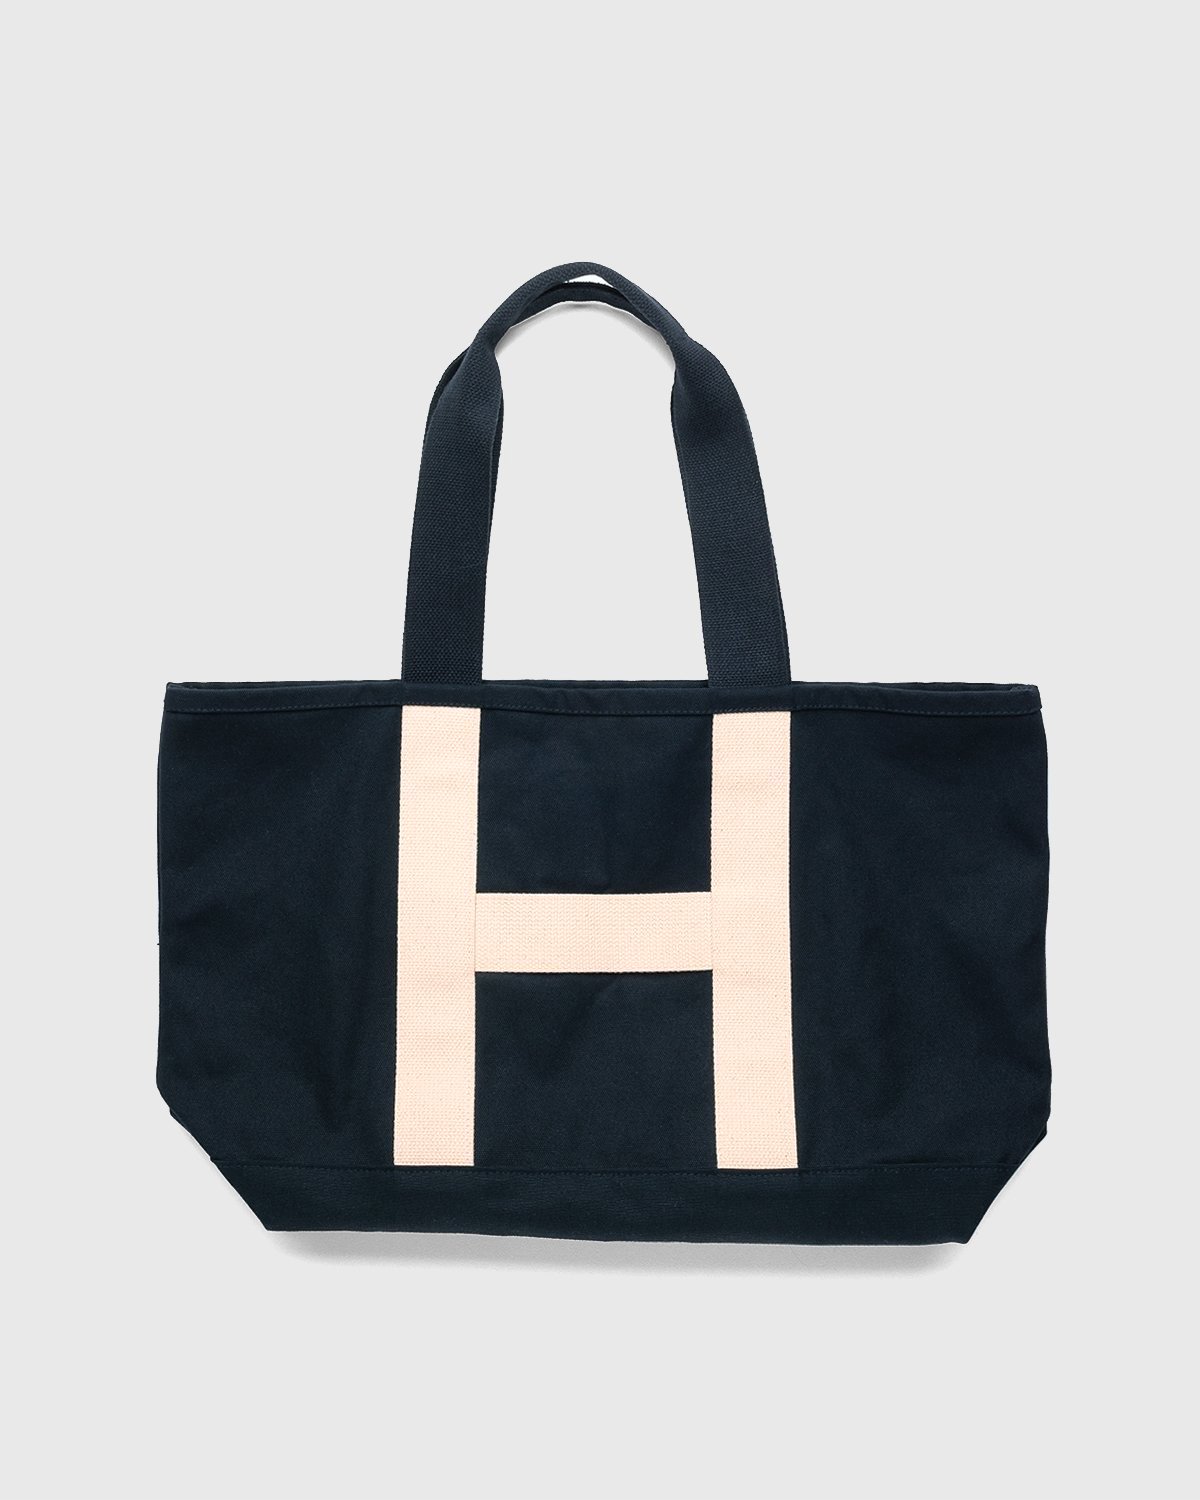 Highsnobiety - Heavy Canvas Large Shopper Tote Black - Accessories - Black - Image 1